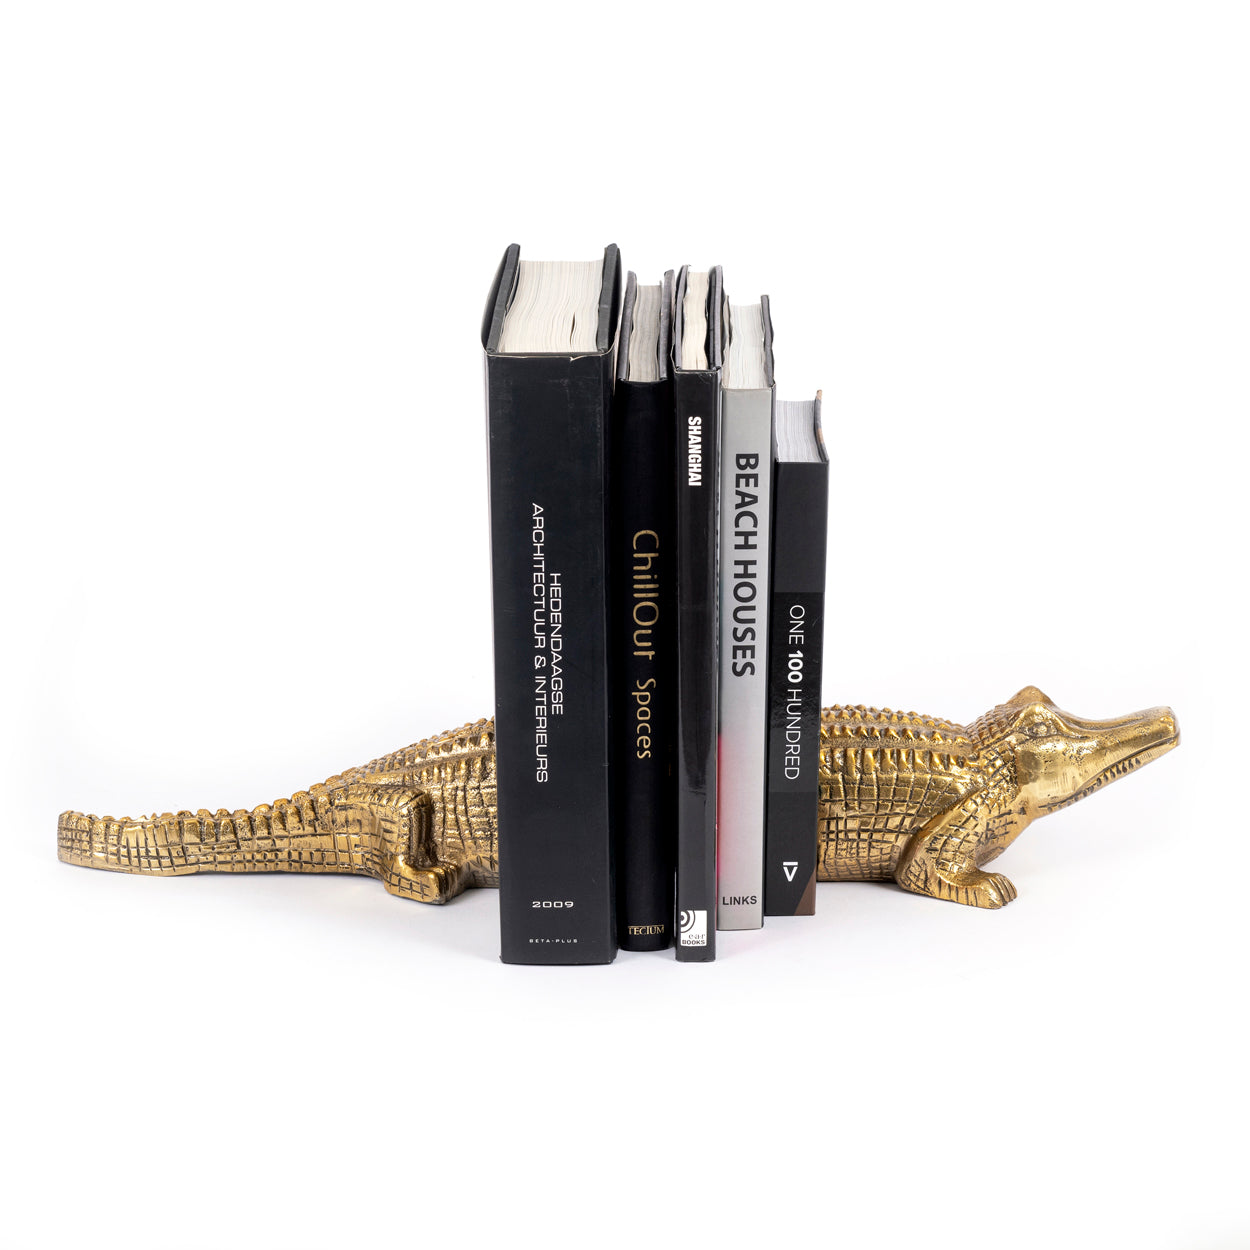 THE CROCODILE Book Stand with books